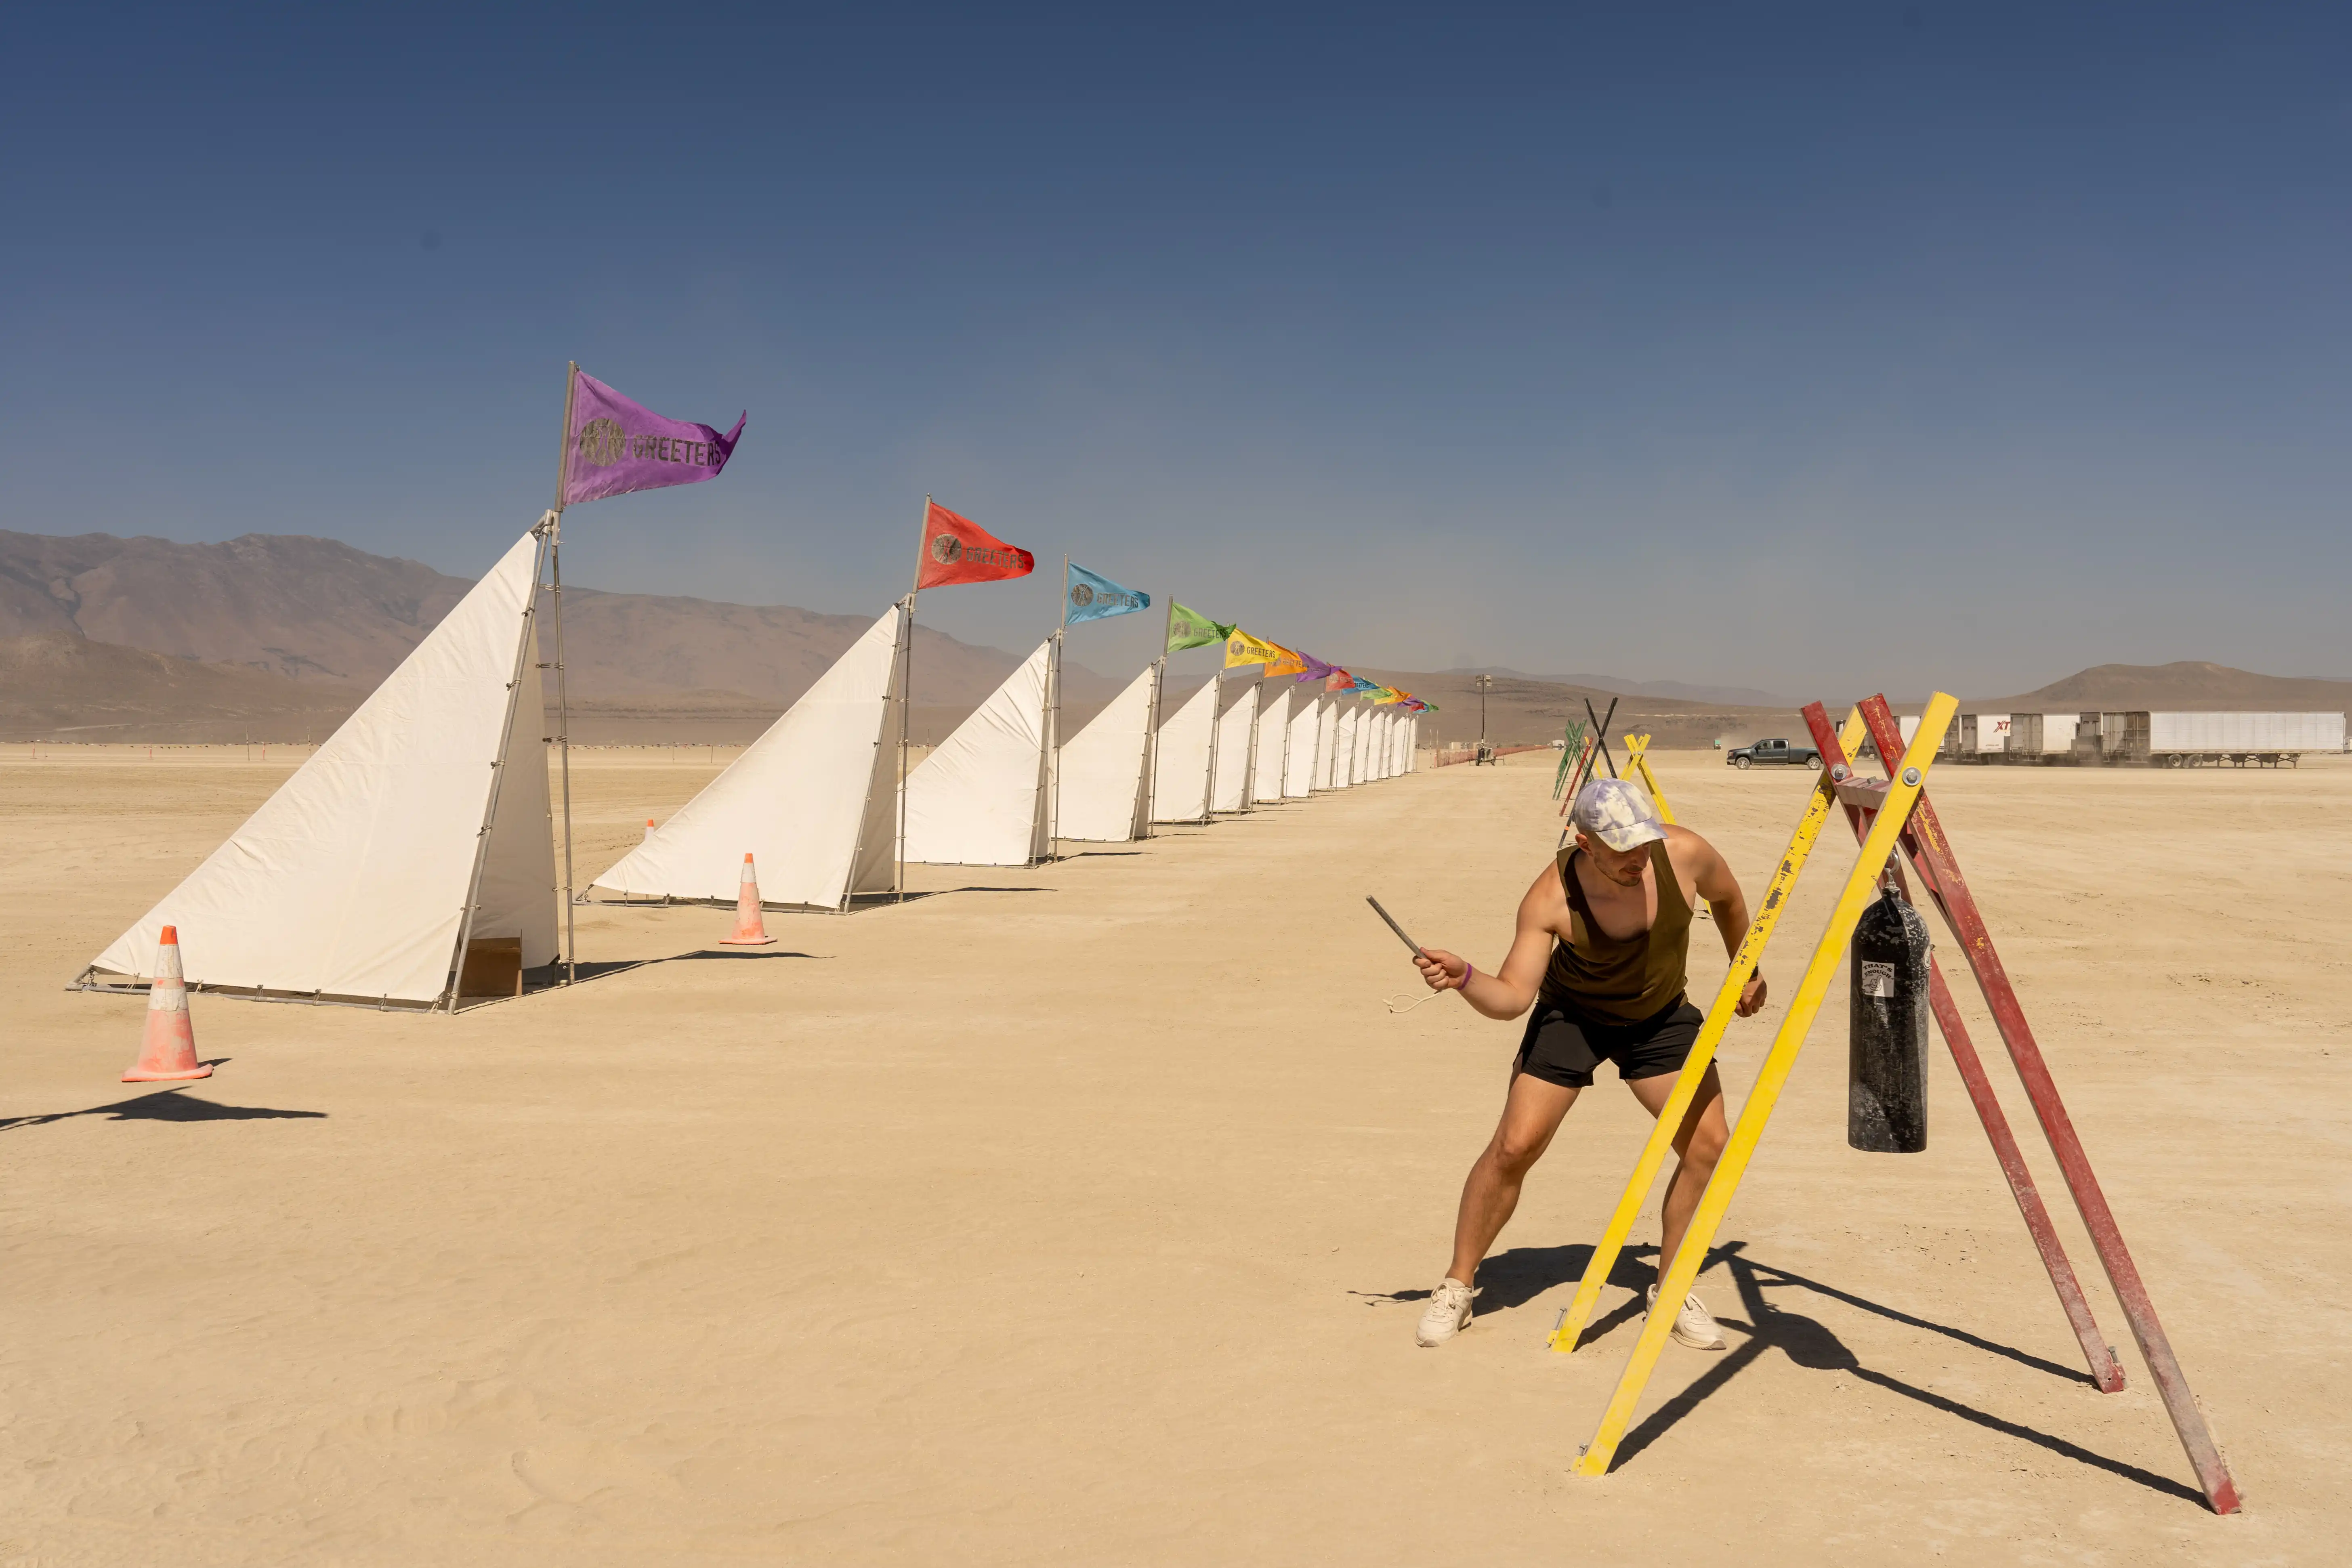 Greeters station at Burning Man. In the foreground, a muscular man in a tank-top is about to hit a large cylindrical bell. In the background, a row of white, triangular lean-to tents with colorful flags labeled Greeters.